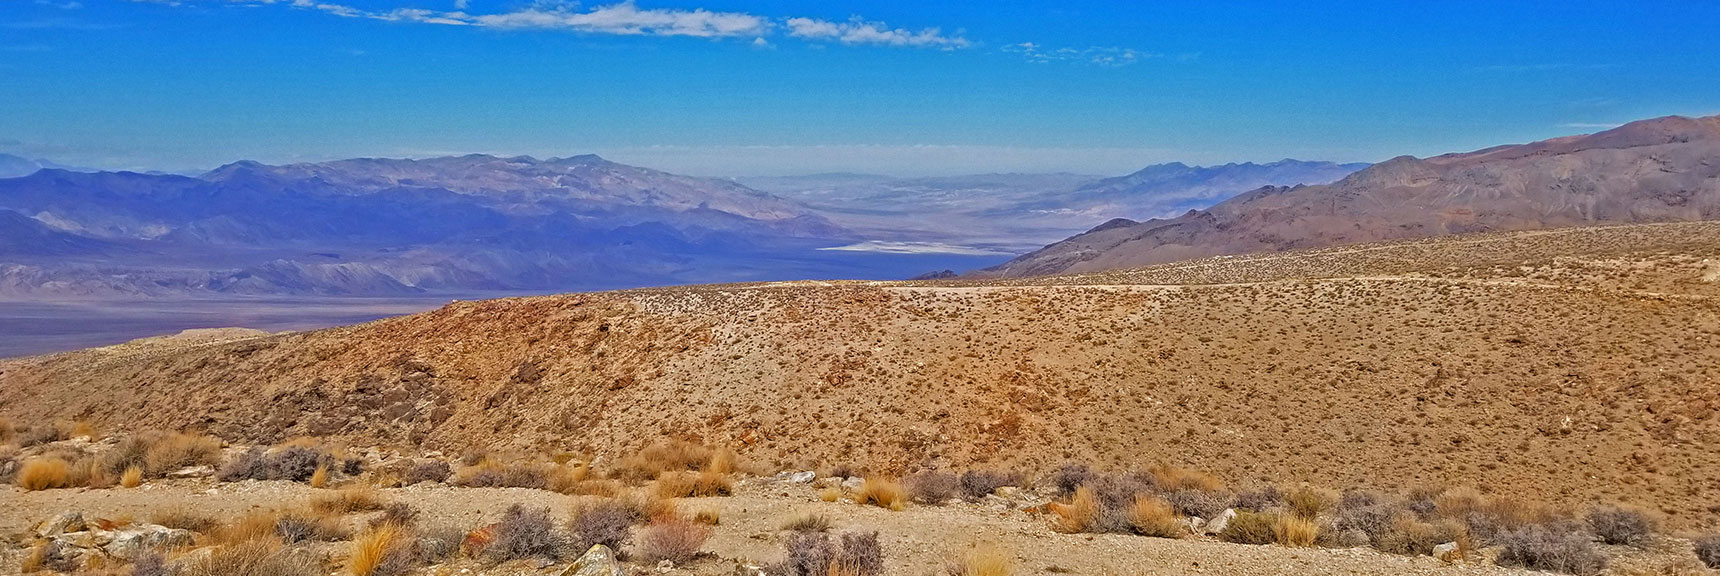 View Down Toward Stovepipe Wells Area and Northern Death Valley | Skidoo Stamp Mill, Panamint Mountains, Death Valley National Park, CA